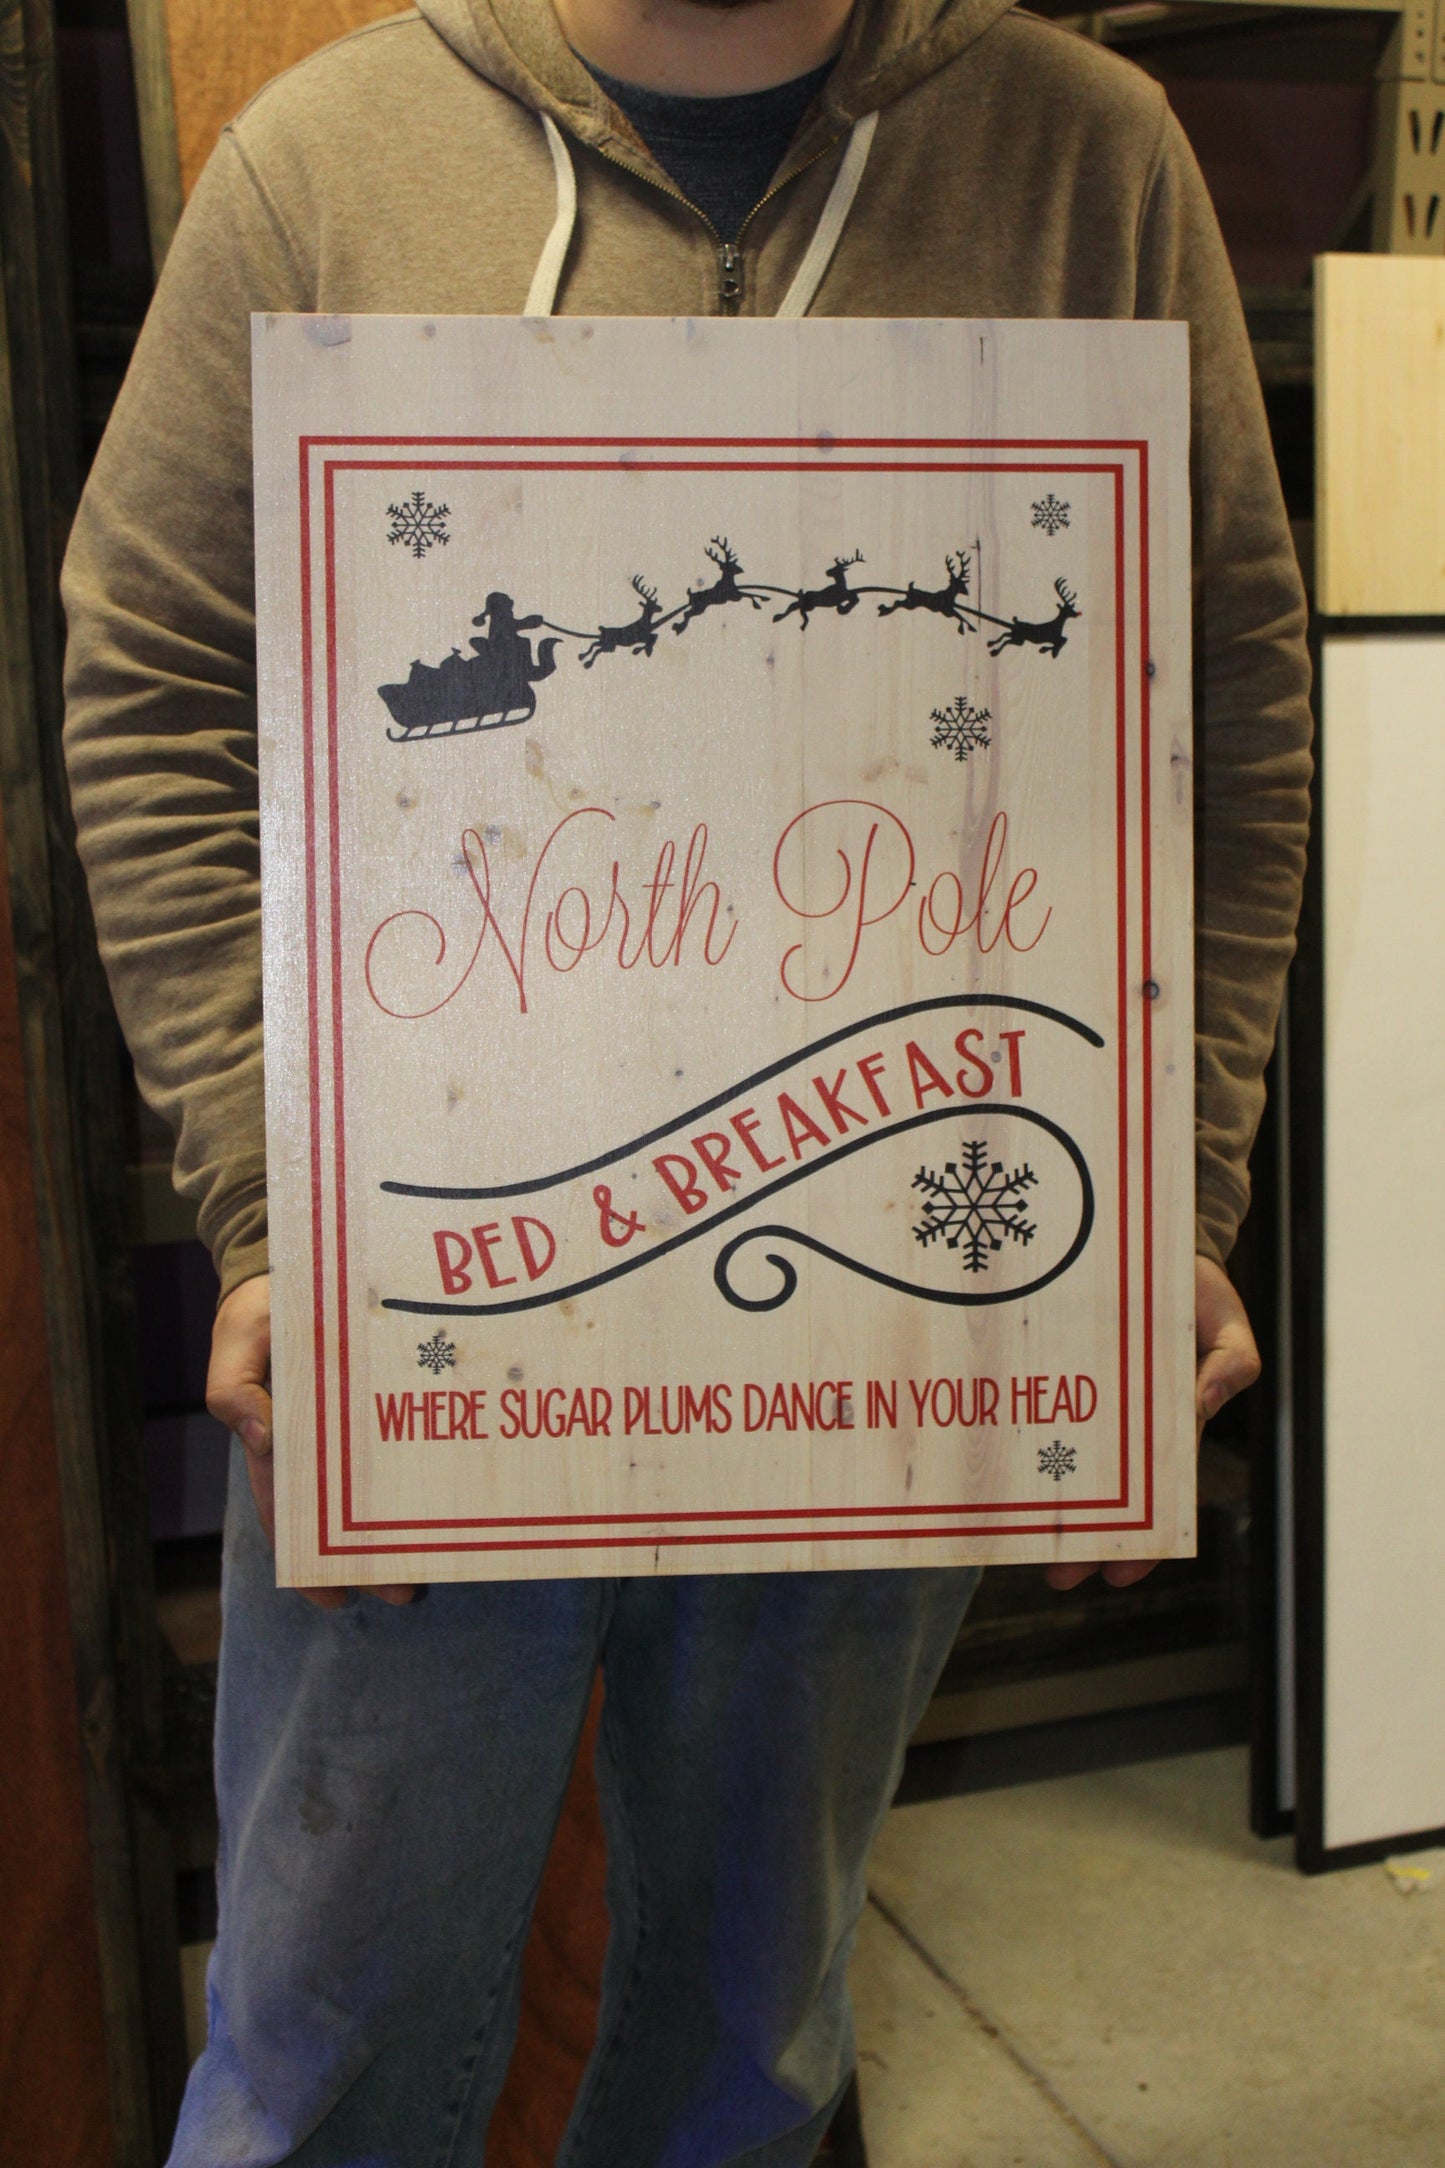 North Pole Bed and Breakfast Wood Sign B&B Printed Color Santa and Flying Reindeer Rudolph Christmas Wall Decoration Art